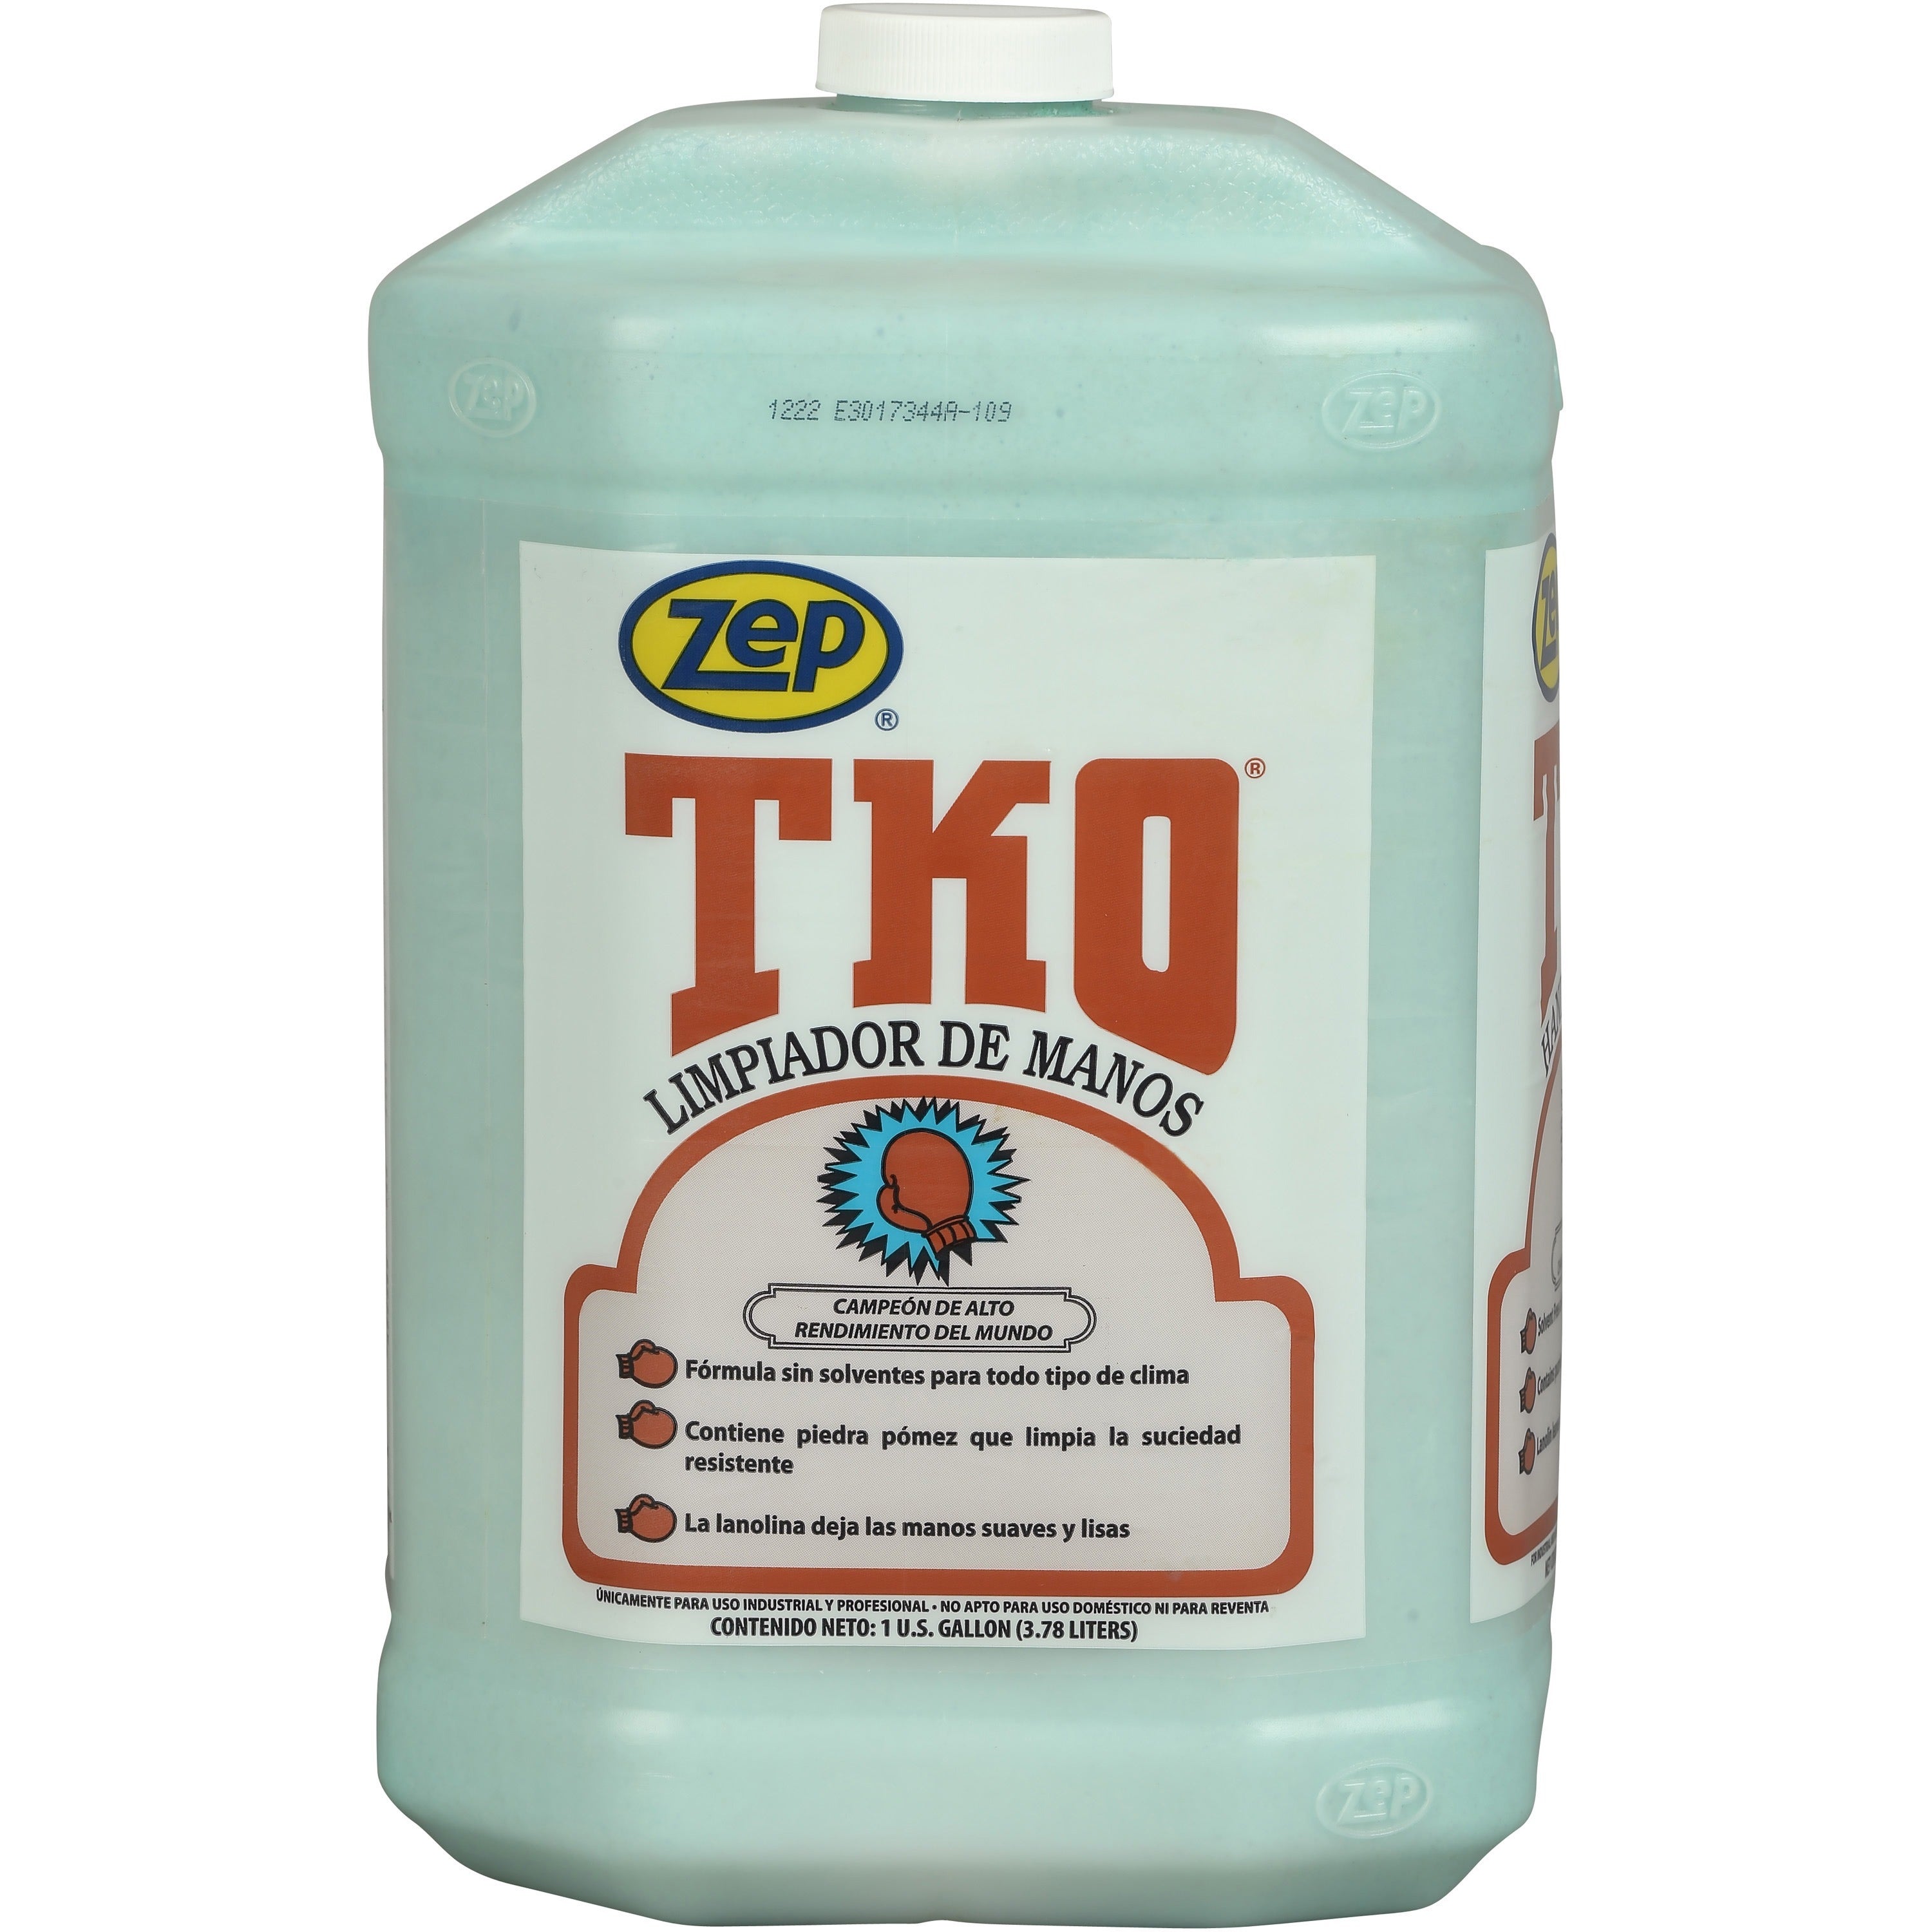 zep-tko-hand-cleaner-lemon-lime-scentfor-1-gal-38-l-dirt-remover-grime-remover-grease-remover-hand-blue-opaque-solvent-free-heavy-duty-non-flammable-4-carton_zper54824ct - 3